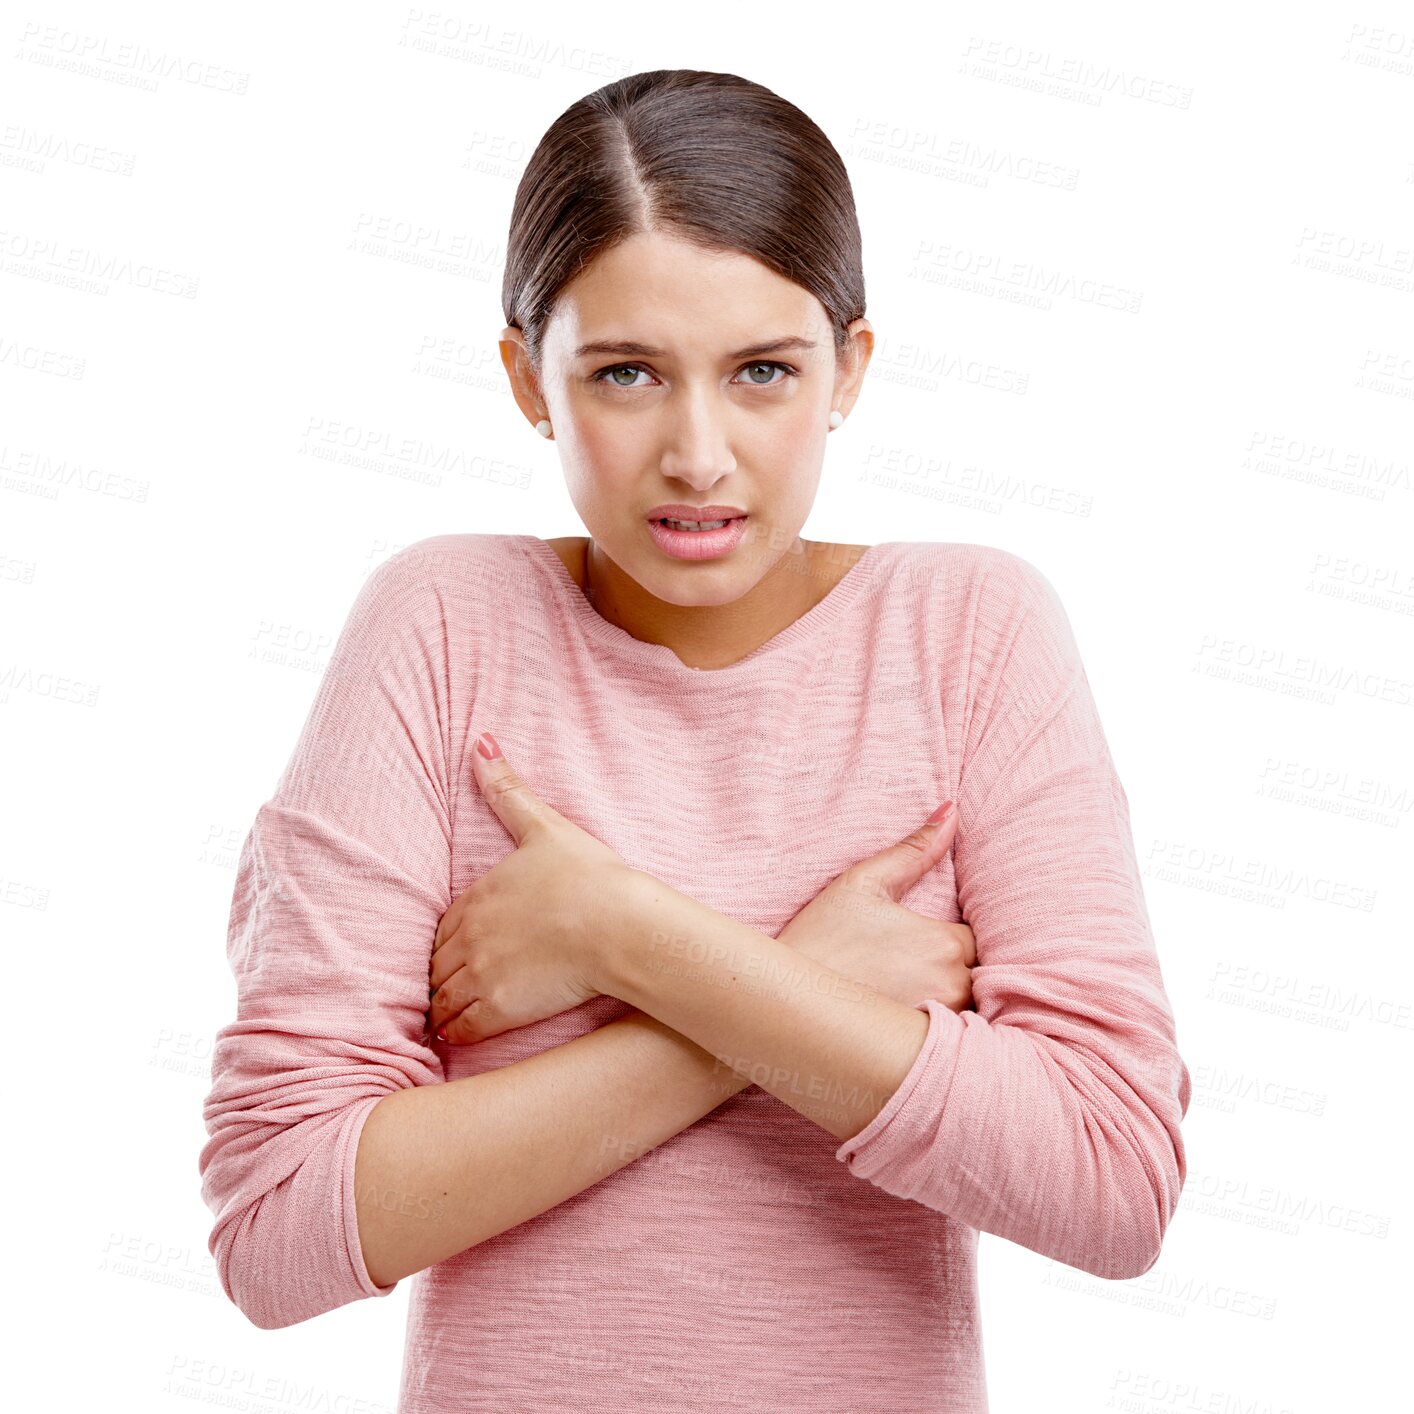 Buy stock photo Portrait, breast cancer and PNG with a woman isolated on a transparent background for health or awareness. Healthcare, medicine and anatomy with an attractive young female covering her chest in pain